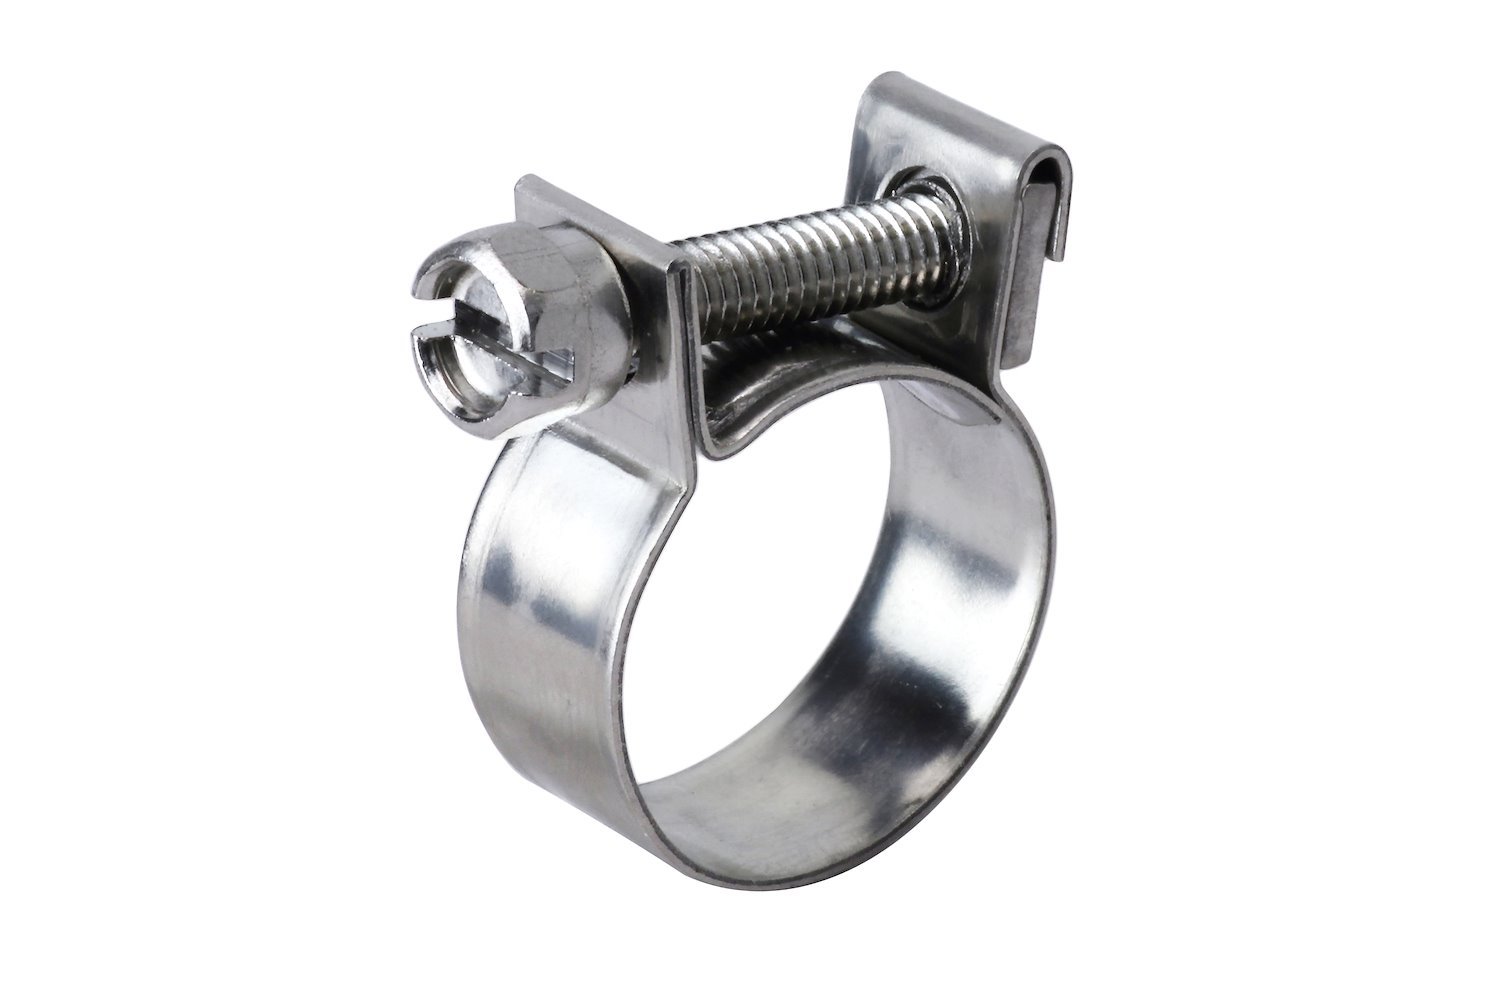 FIC-6 Fuel Injection Hose Clamp, Stainless Steel Small Hose Clamp, SAE Size 8, 1/4 in. - 5/16 in. (6 mm-8 mm)